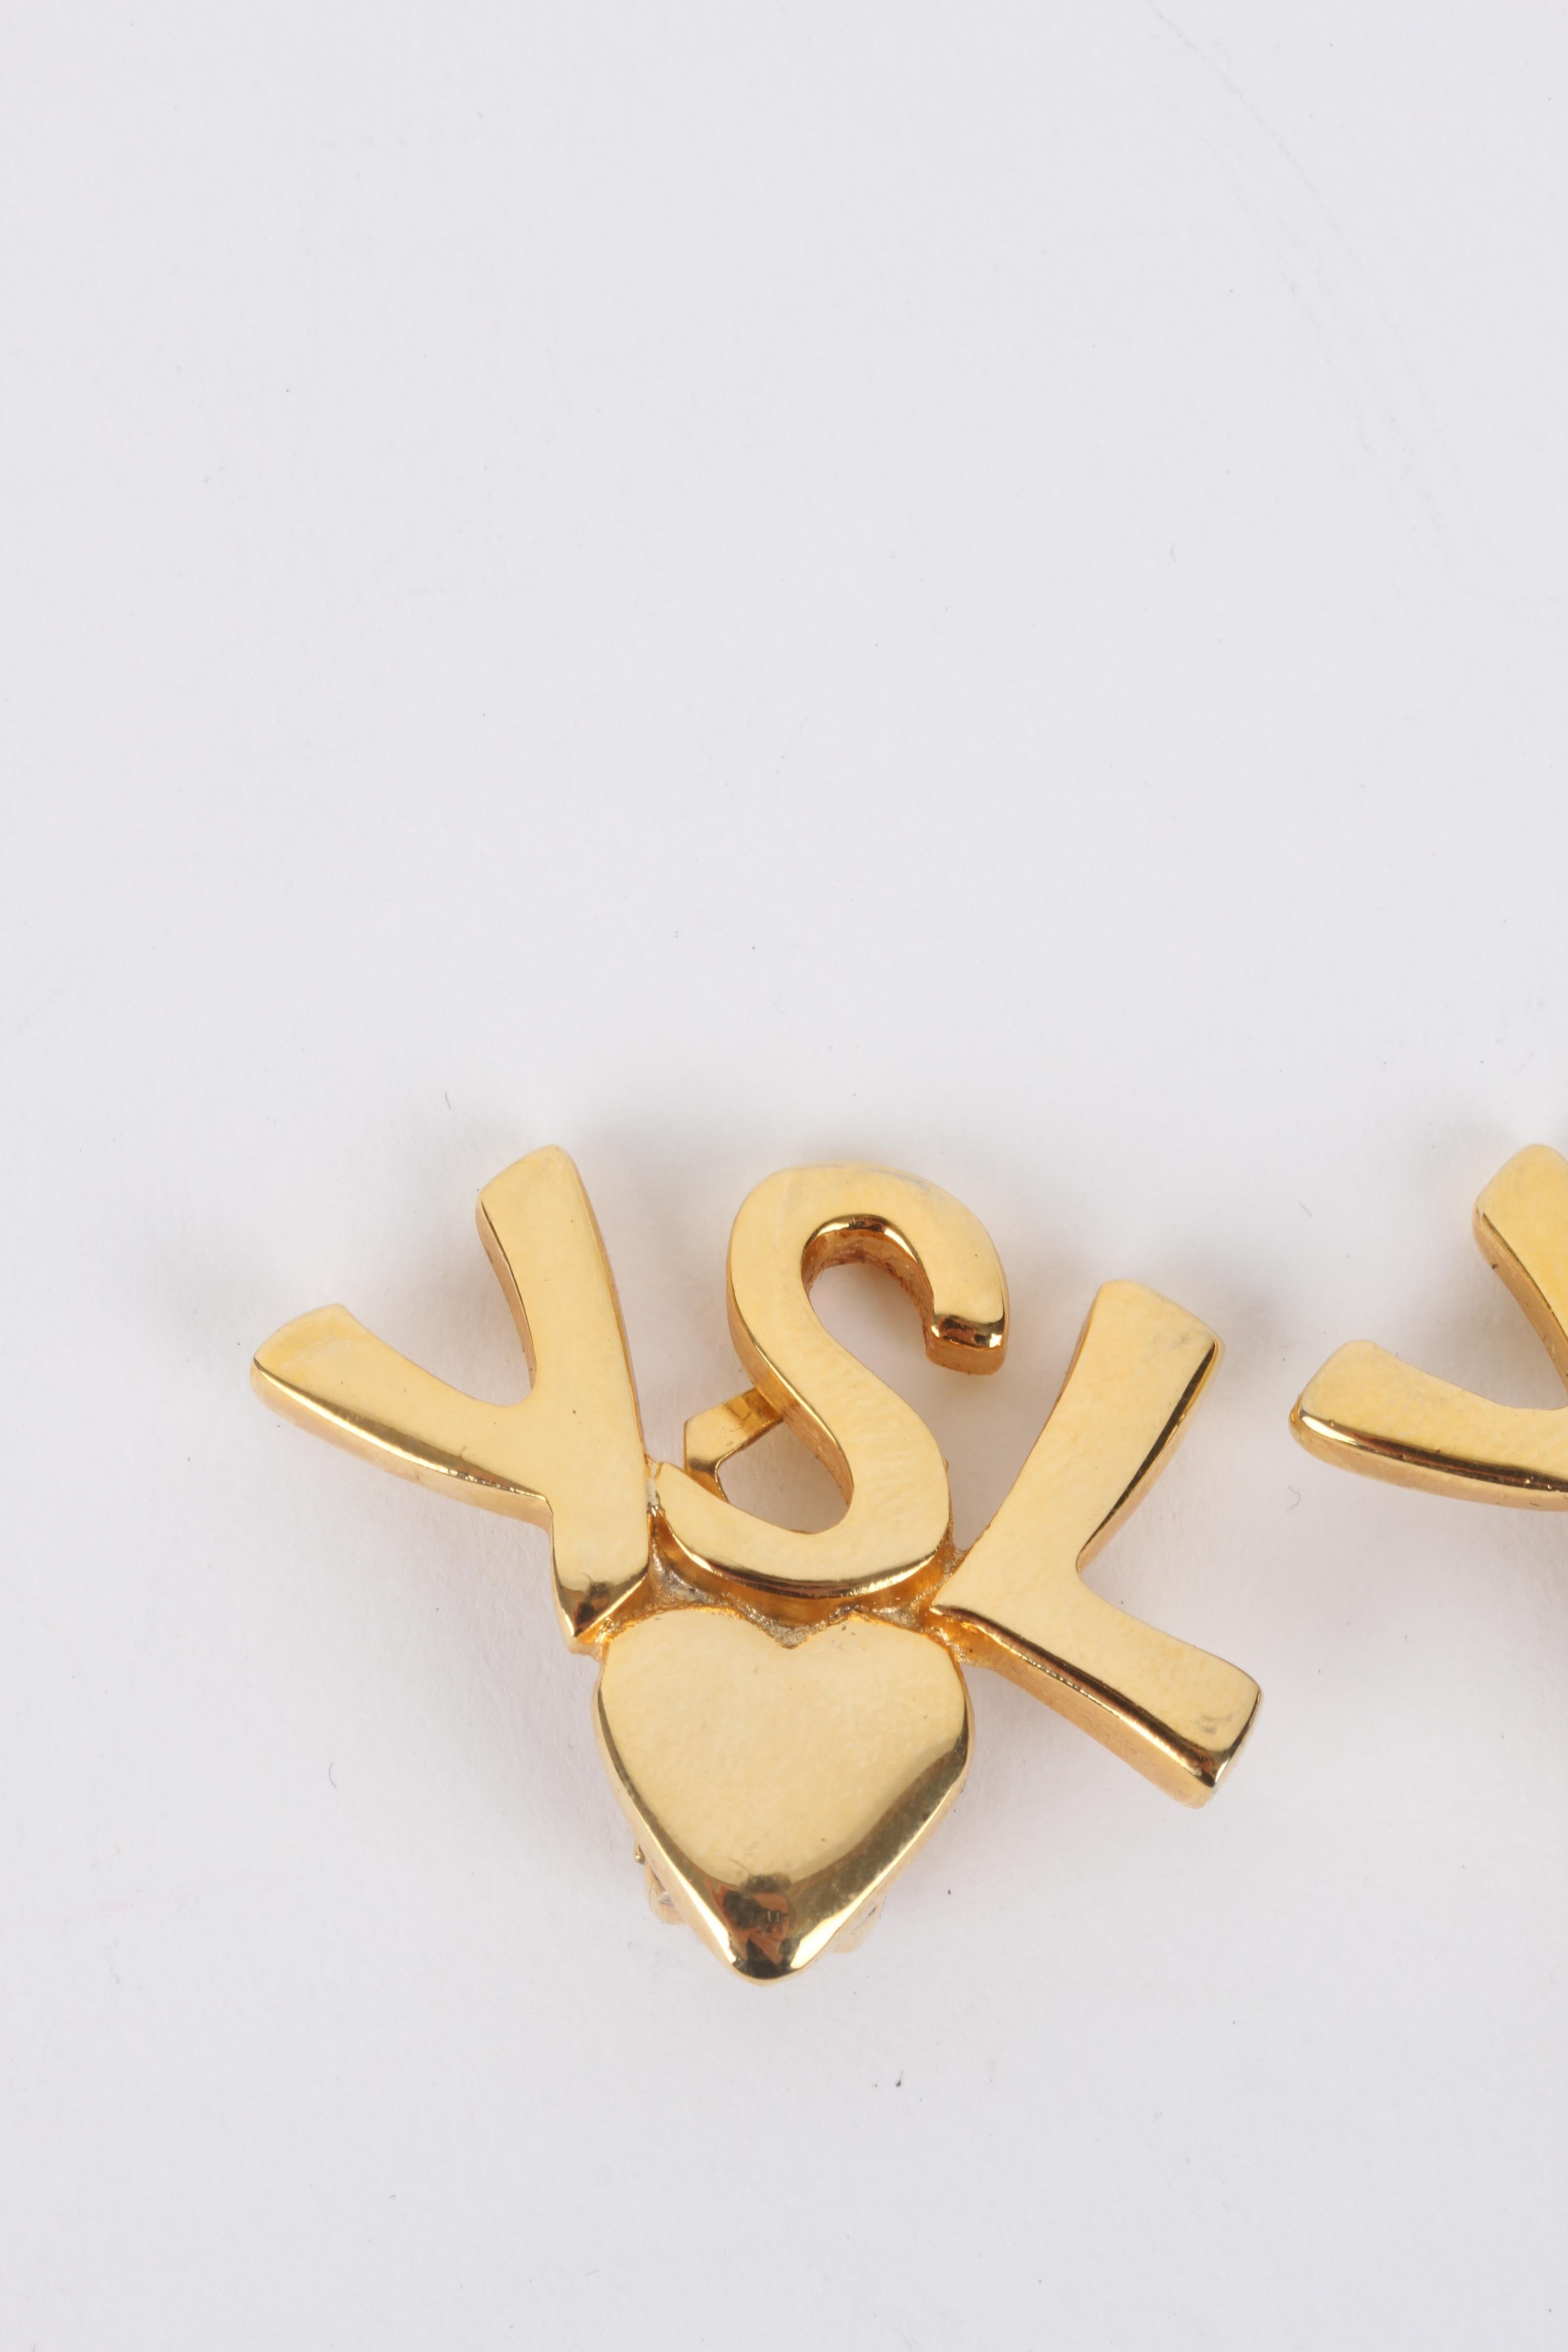 Yves Saint Laurent Gold Logo Initials Heart Clip-On Earrings.

These earrings feature a lux gold-coloured 'YSL'-logo exterior with a smaller bottom heart finish. The earrings feature a gold-plated backside clip fastening. The exterior is clean and